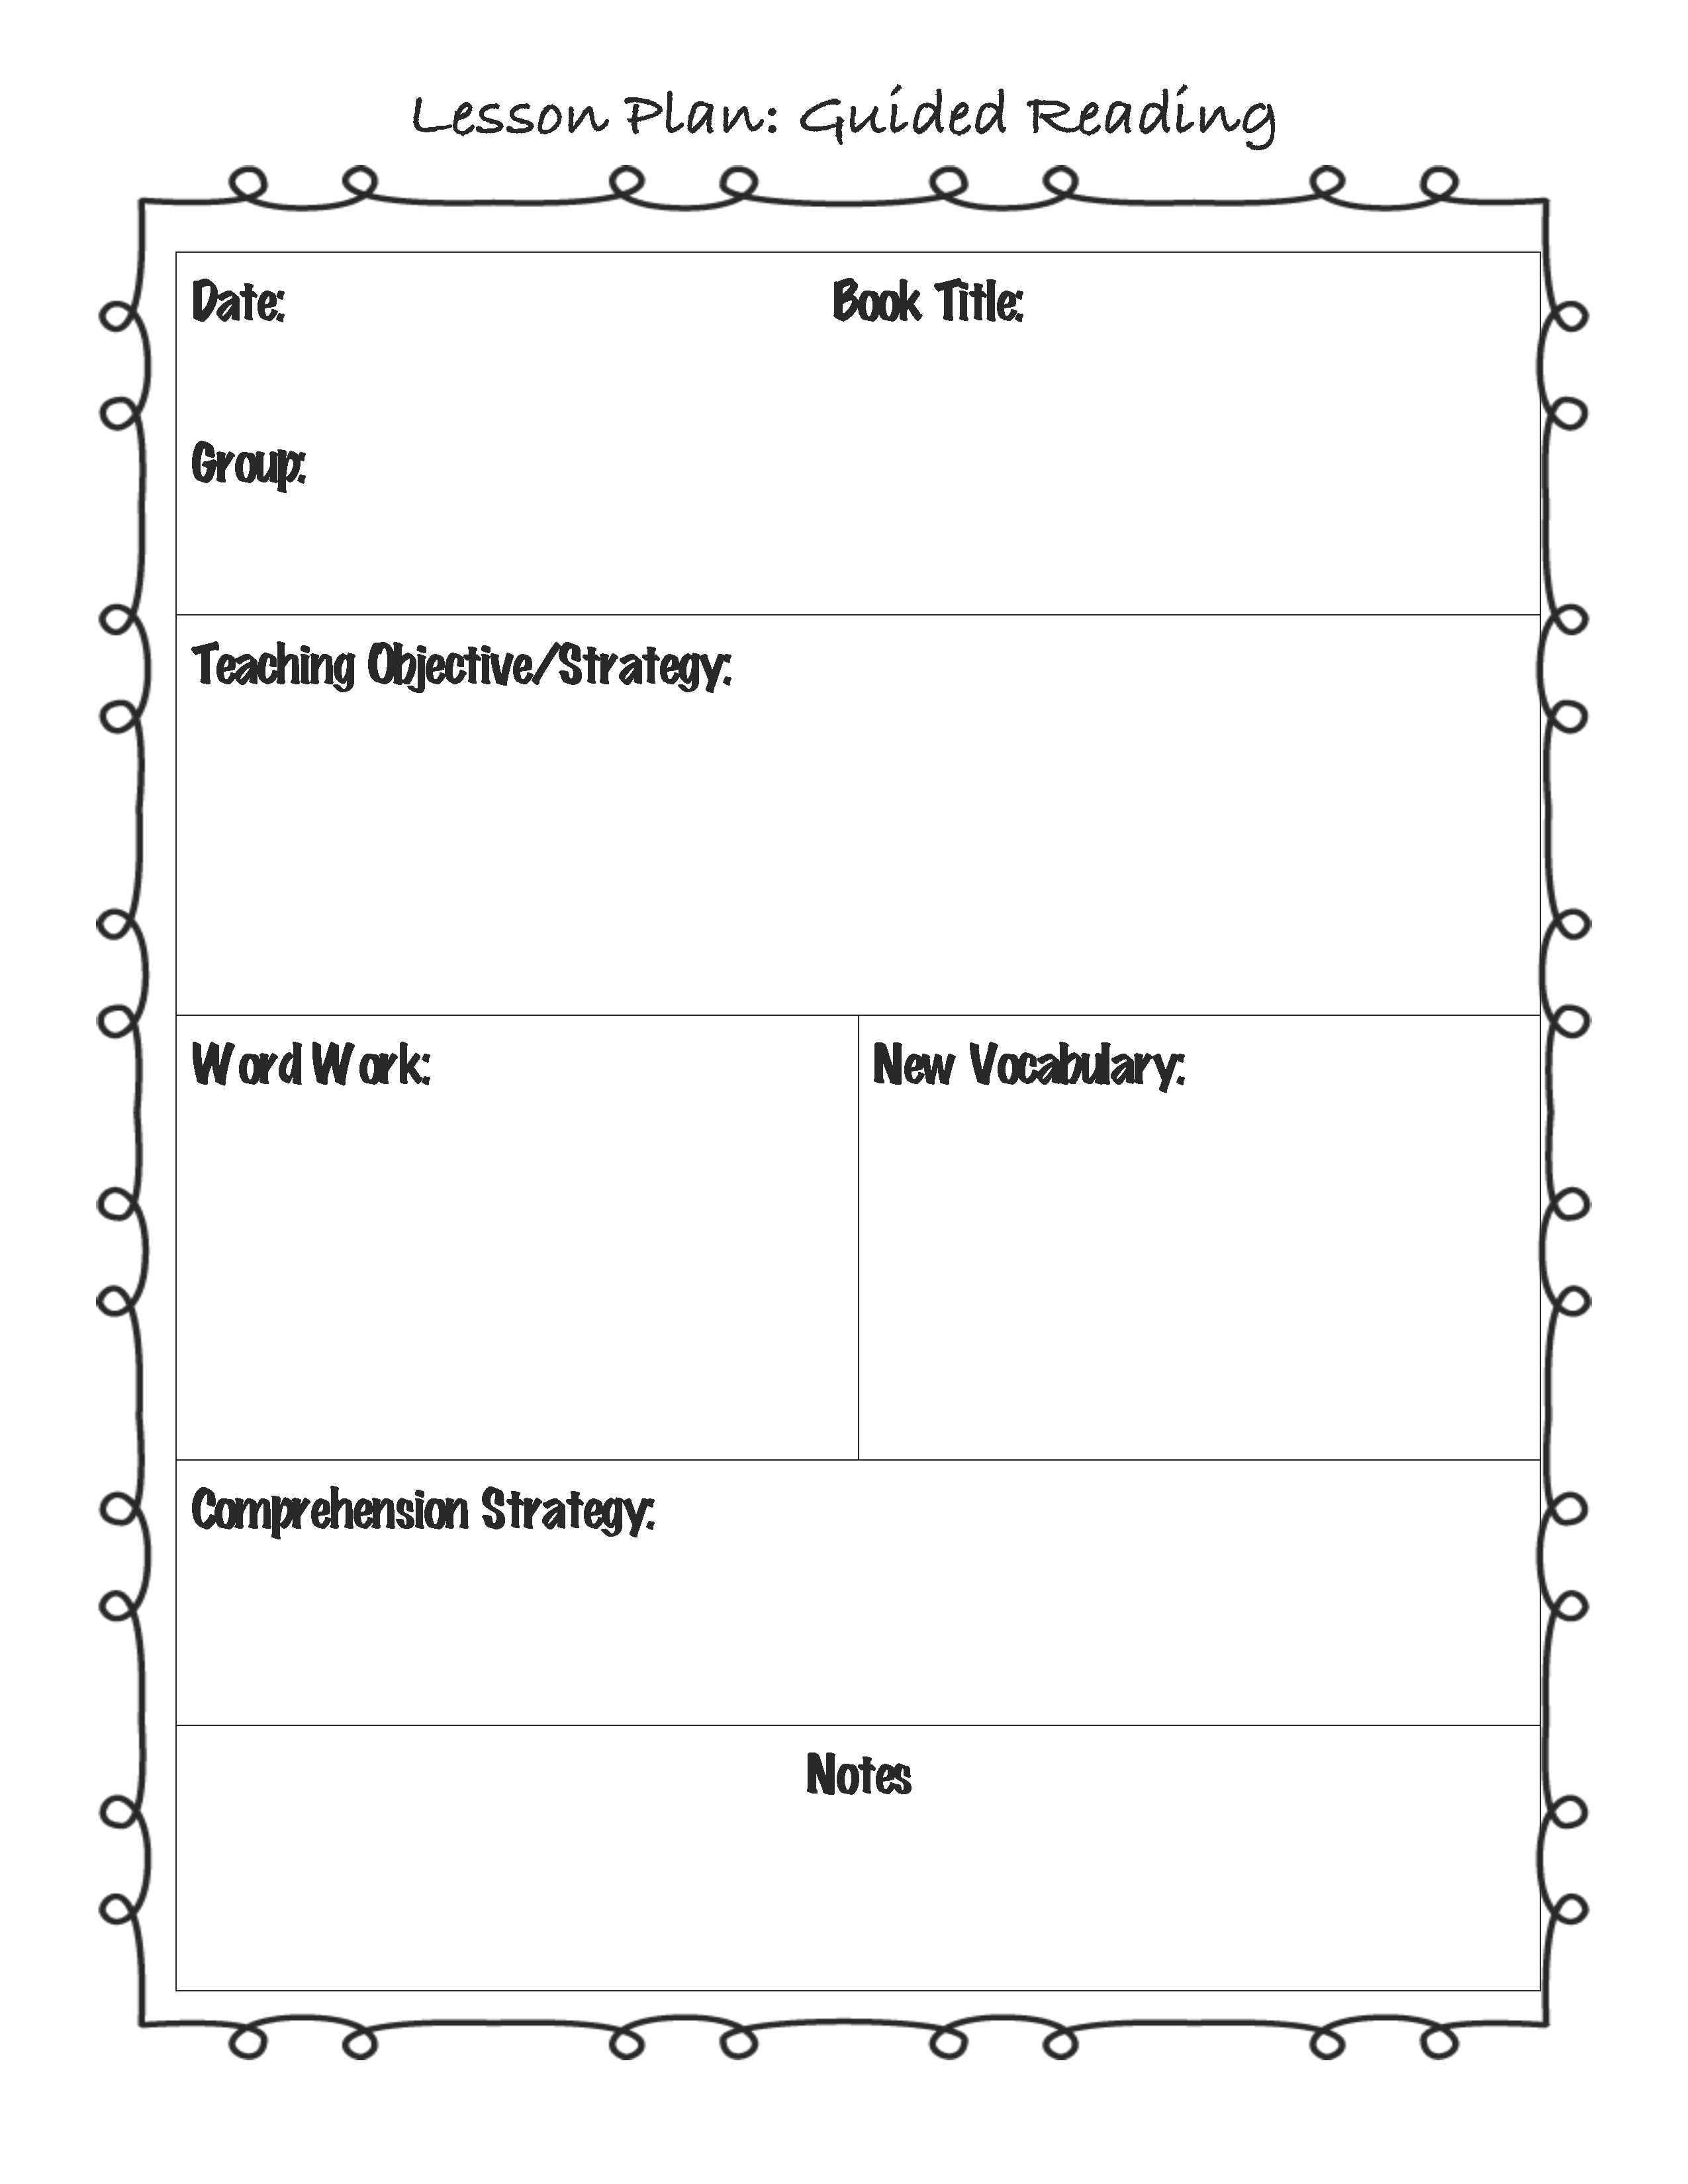 Free Printable Guided Reading Lesson Plan Templates Printable Lesson